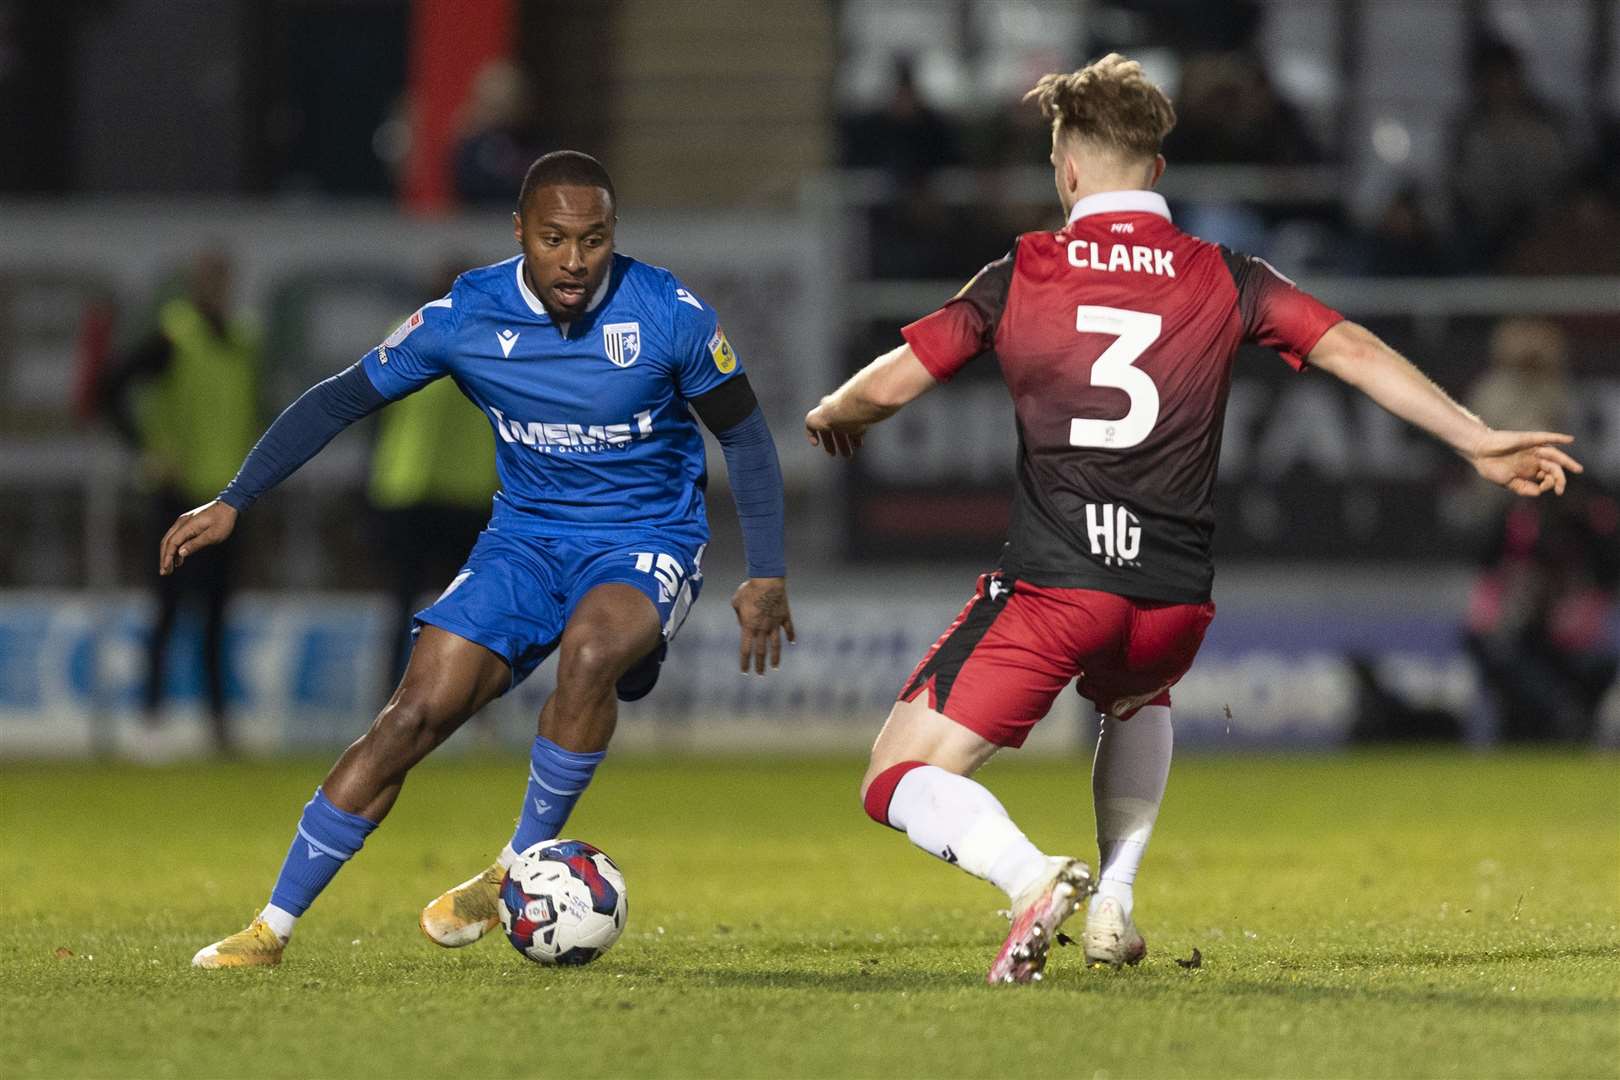 Callum Harriott takes on his man after coming off the bench